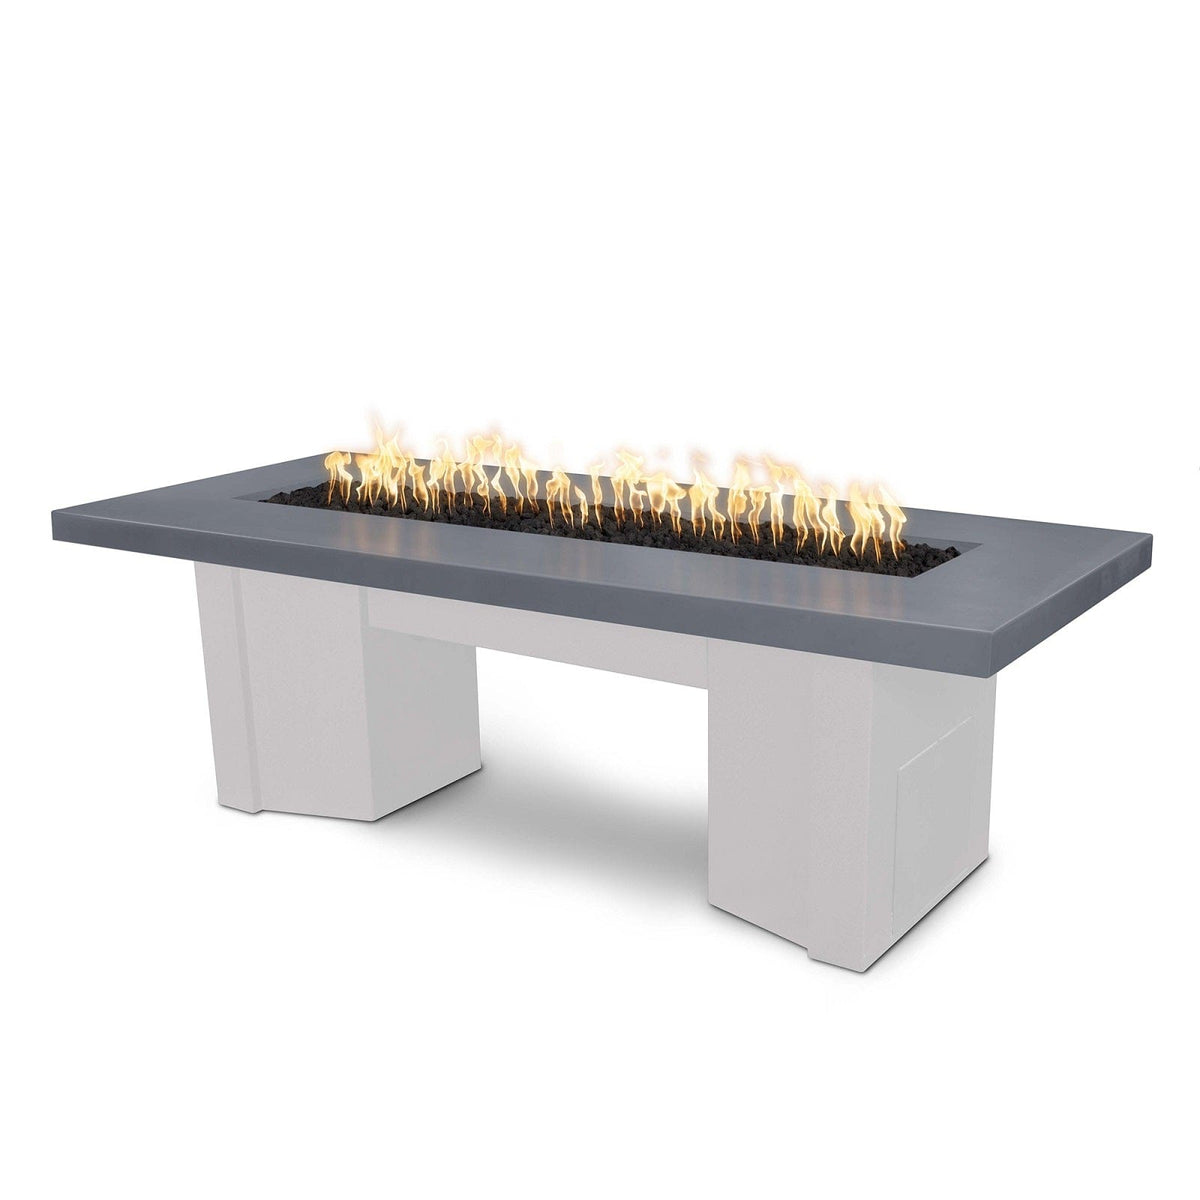 The Outdoor Plus Fire Features Gray (-GRY) / White Powder Coated Steel (-WHT) The Outdoor Plus 60&quot; Alameda Fire Table Smooth Concrete in Natural Gas - Match Lit with Flame Sense System / OPT-ALMGFRC60FSML-NG